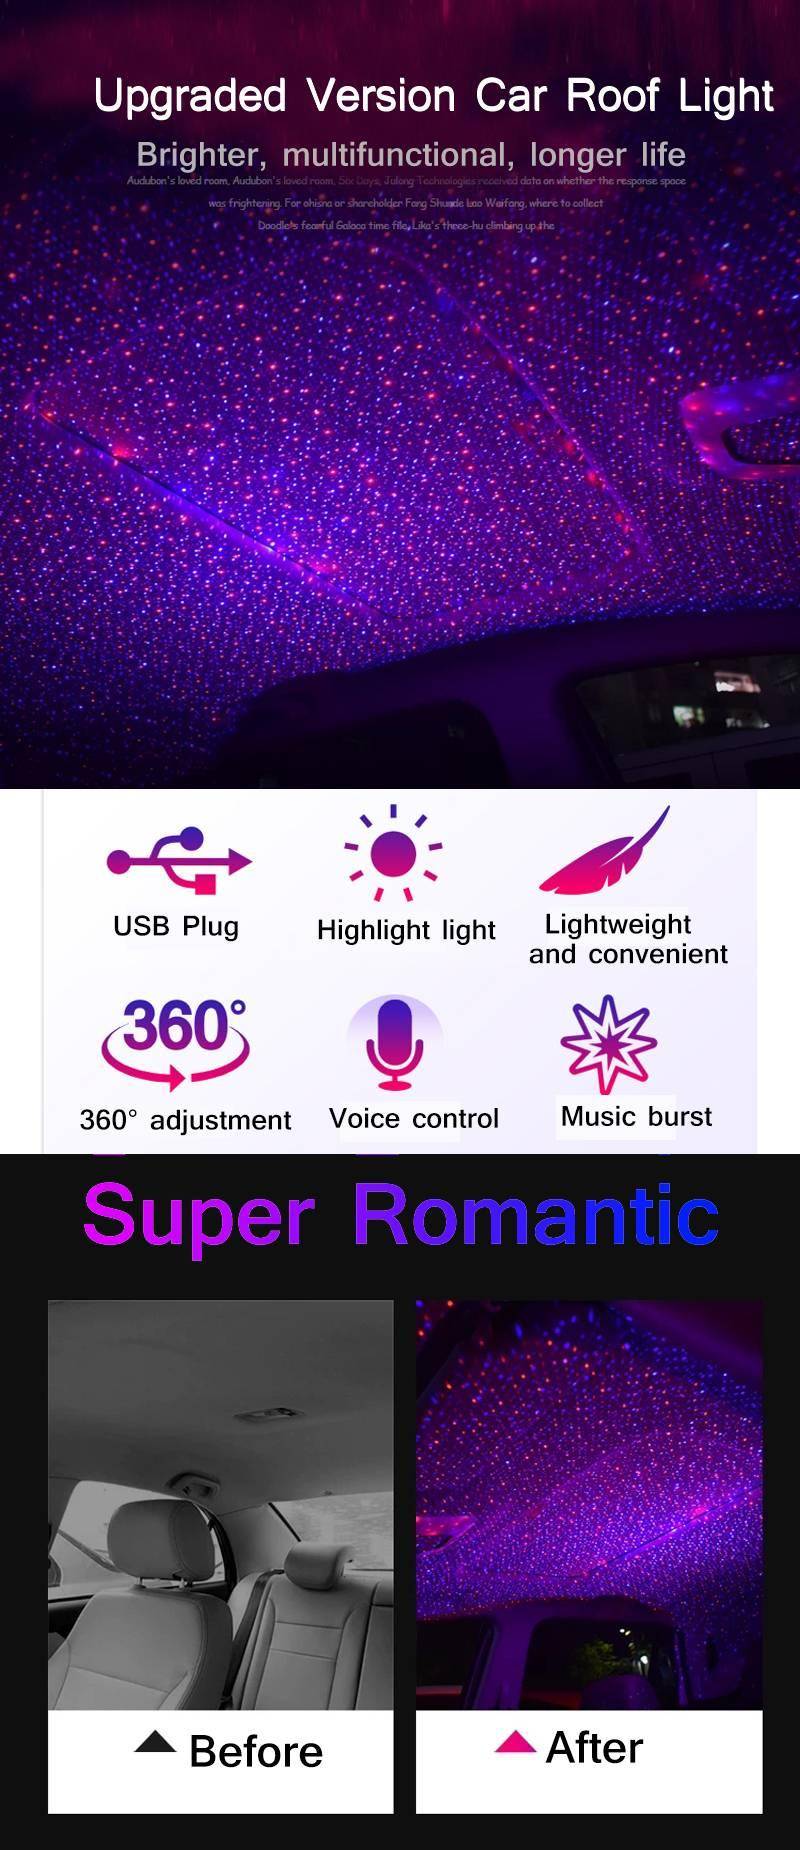 Car Interior Atmosphere Stary Laser Lamp USB Led Roof Car Star Night Light Projector Super Brightness Auto Starry Decoration Music Electronics EXTRA ACCESSORIES LED Lights 061330ff83c078d1804901: 3pc converters|A Blue|A Blue Red|A Green|A Green Red|A Red|B Blue|B Blue Red|B Green Red|B Red|Cigarette Lighter|Purple